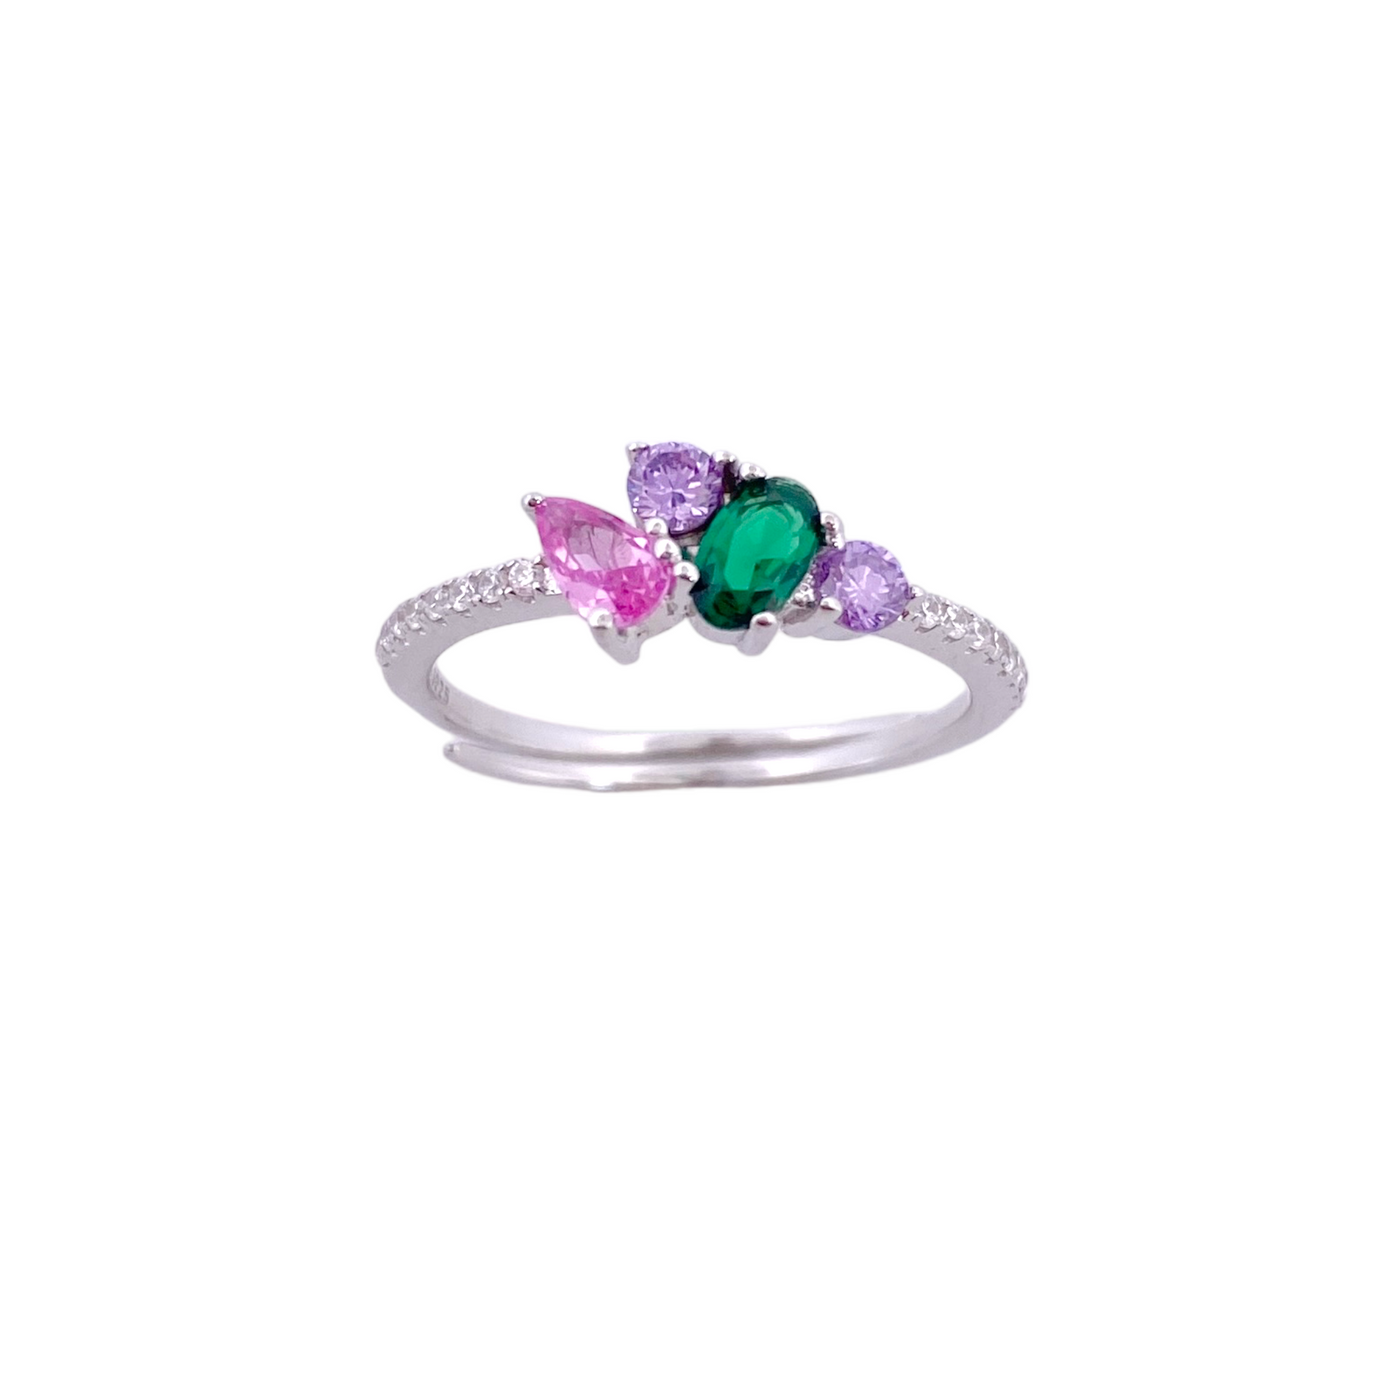 SILVER RING WITH MULTI SHAPE STONES